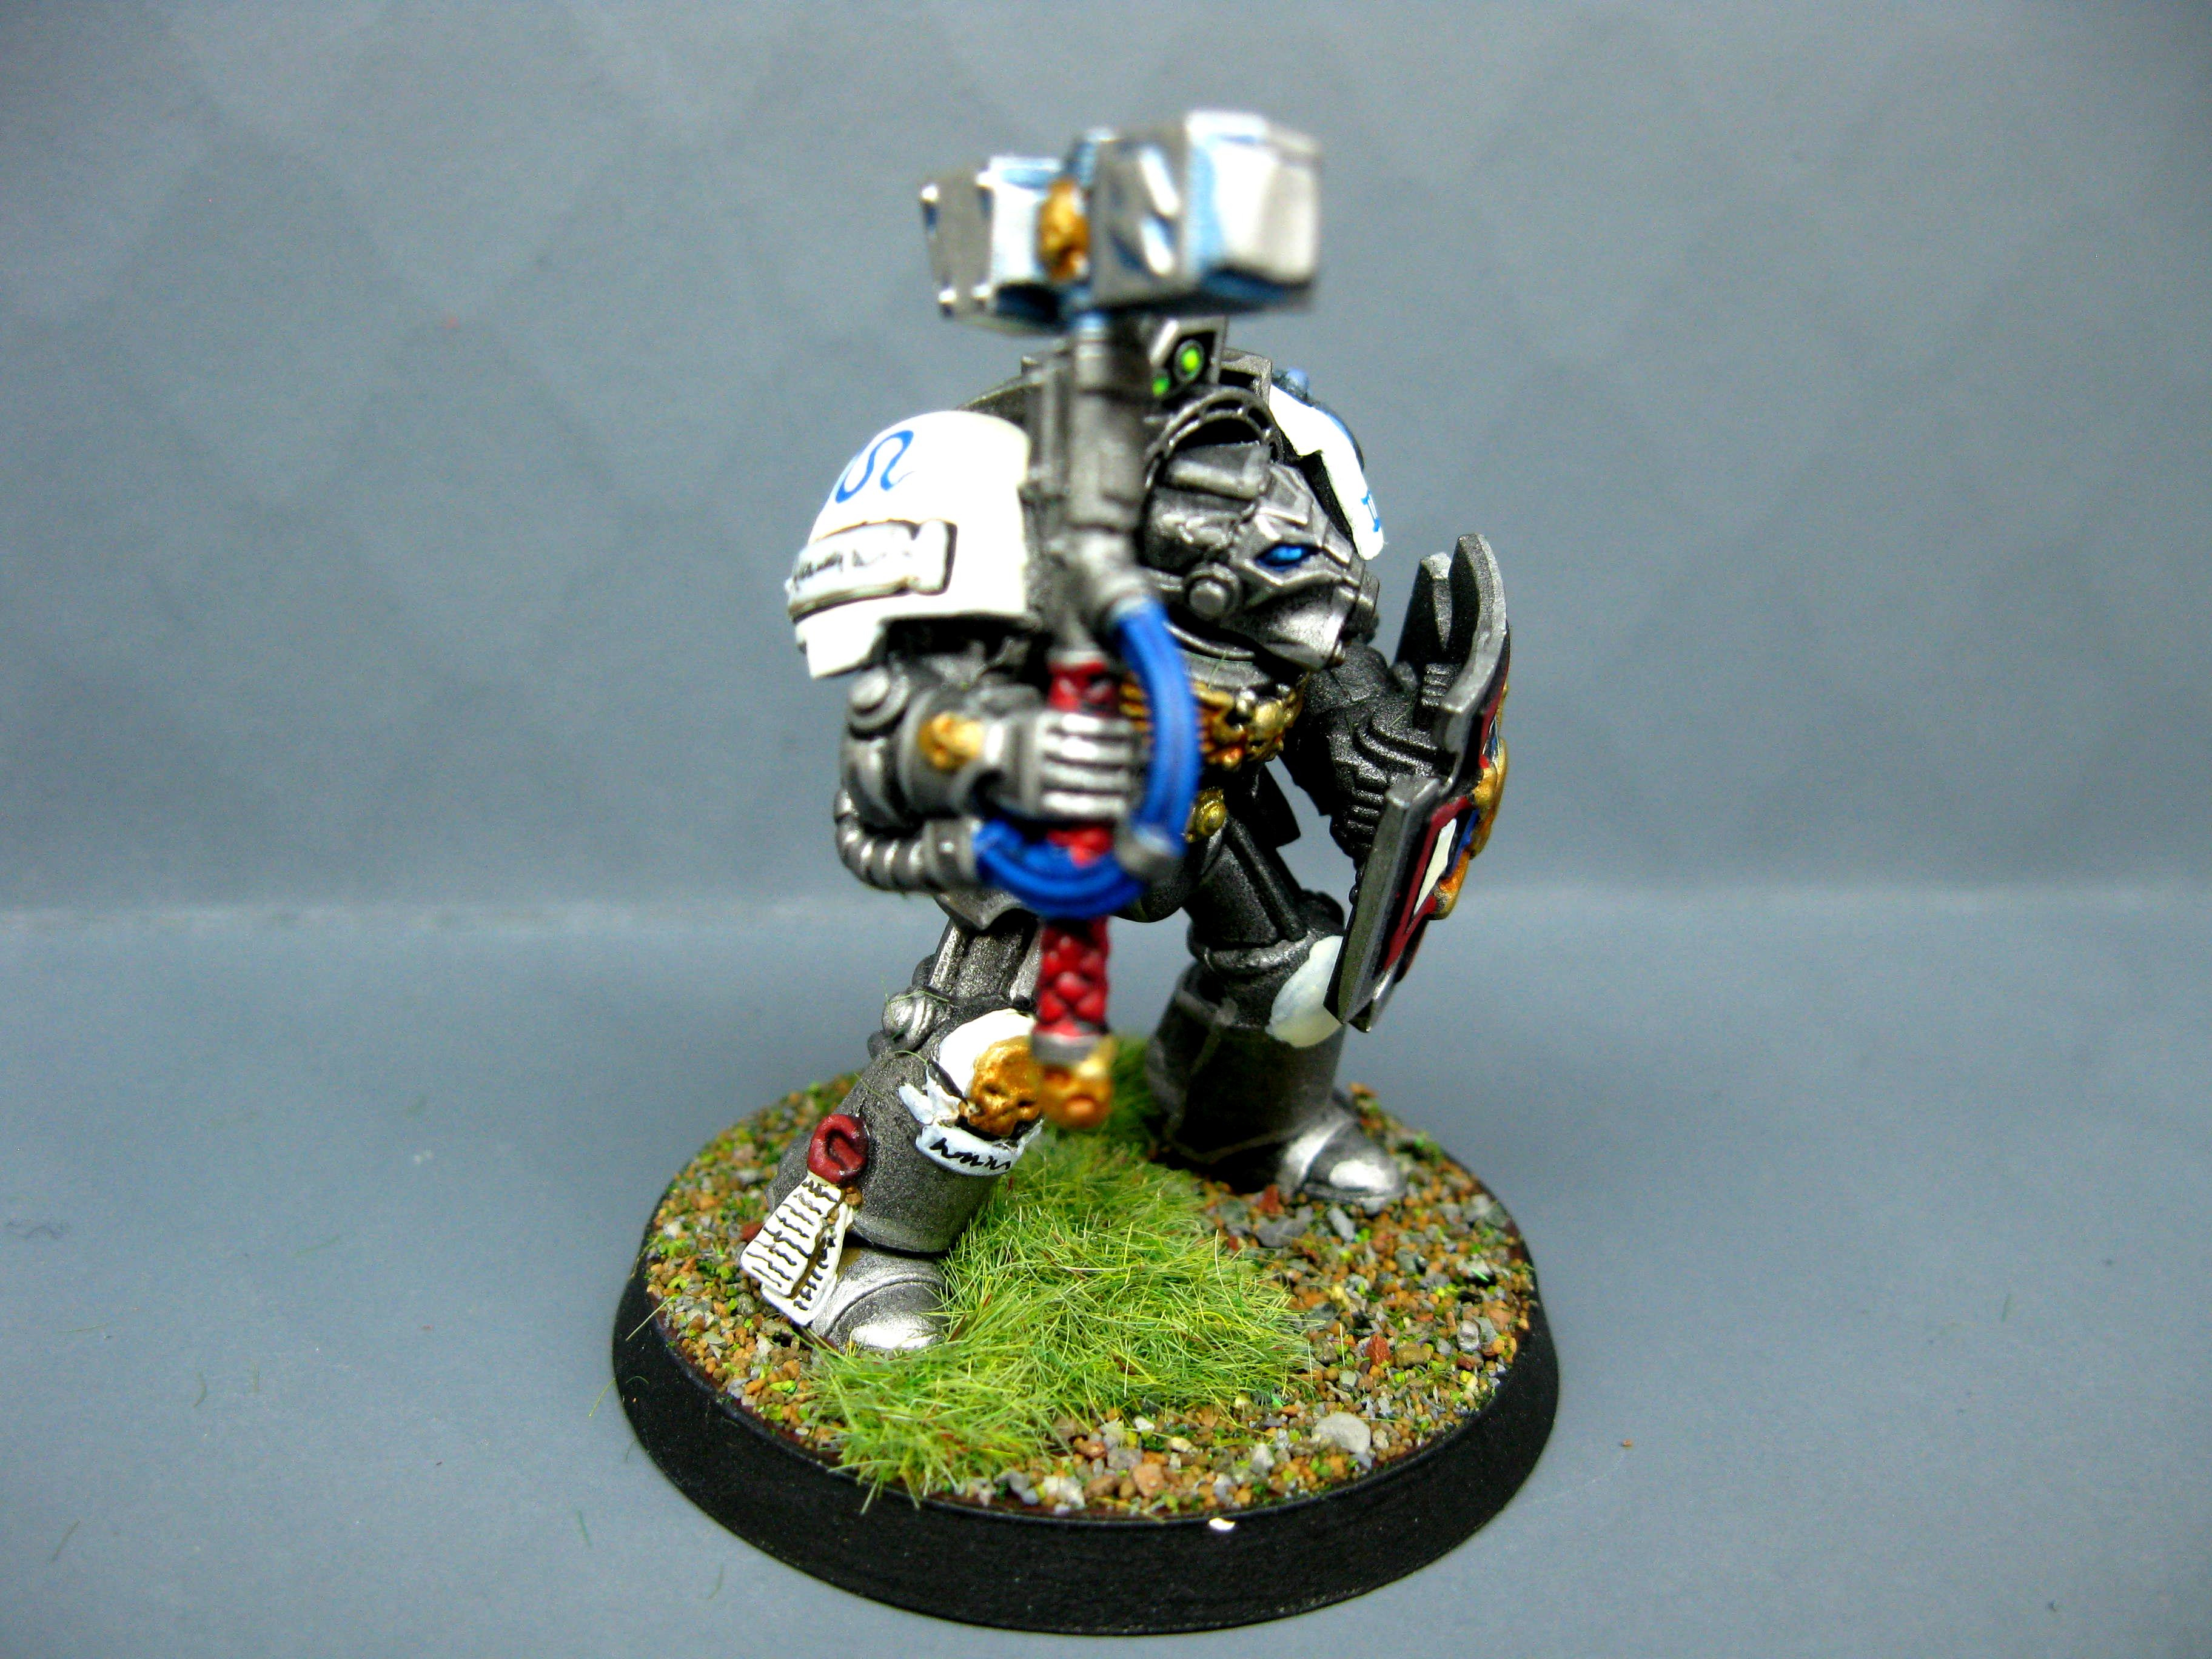 Iron Snakes, Pro Painted, Space Marines, Warhammer 40,000